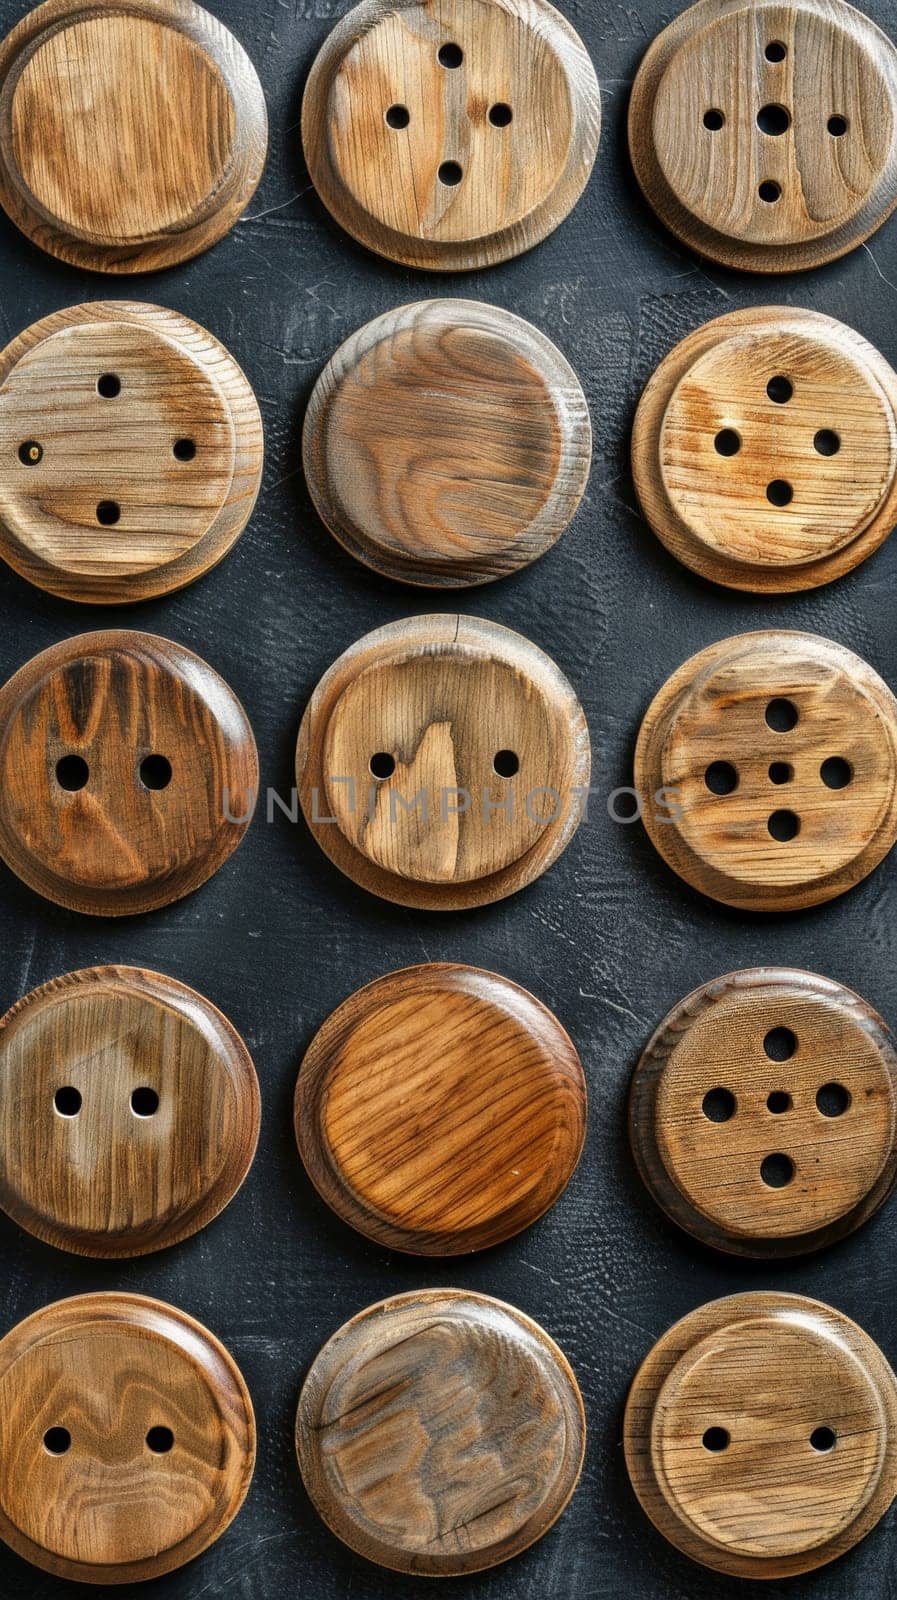 A bunch of wooden buttons are arranged on a black surface, AI by starush